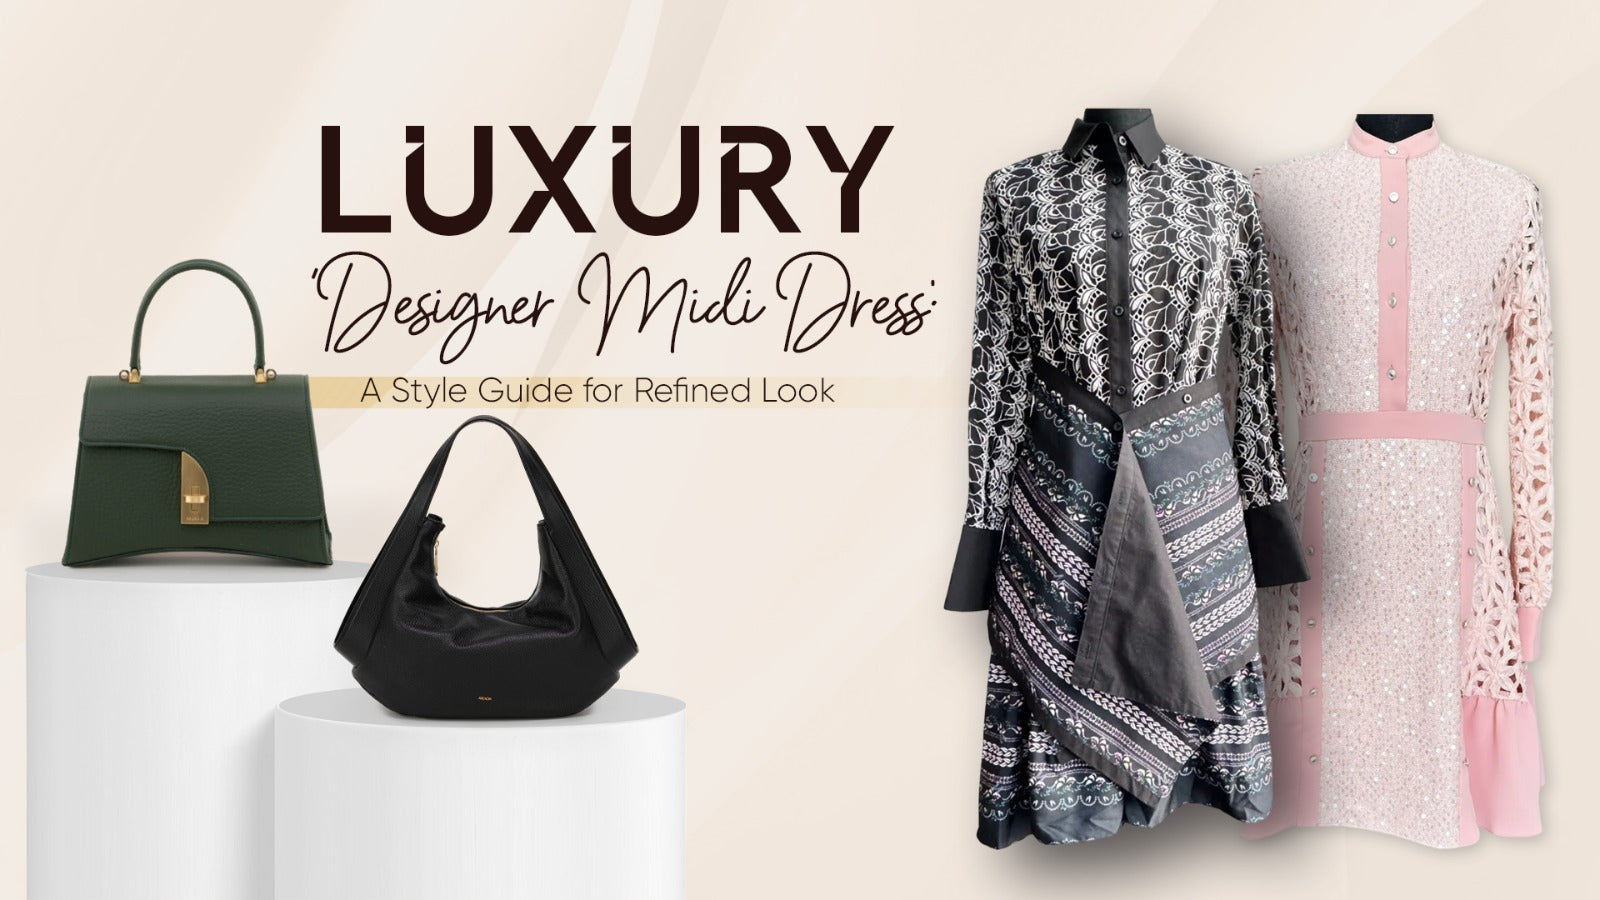 Luxury Designer Midi Dress: A Style Guide for Refined Look